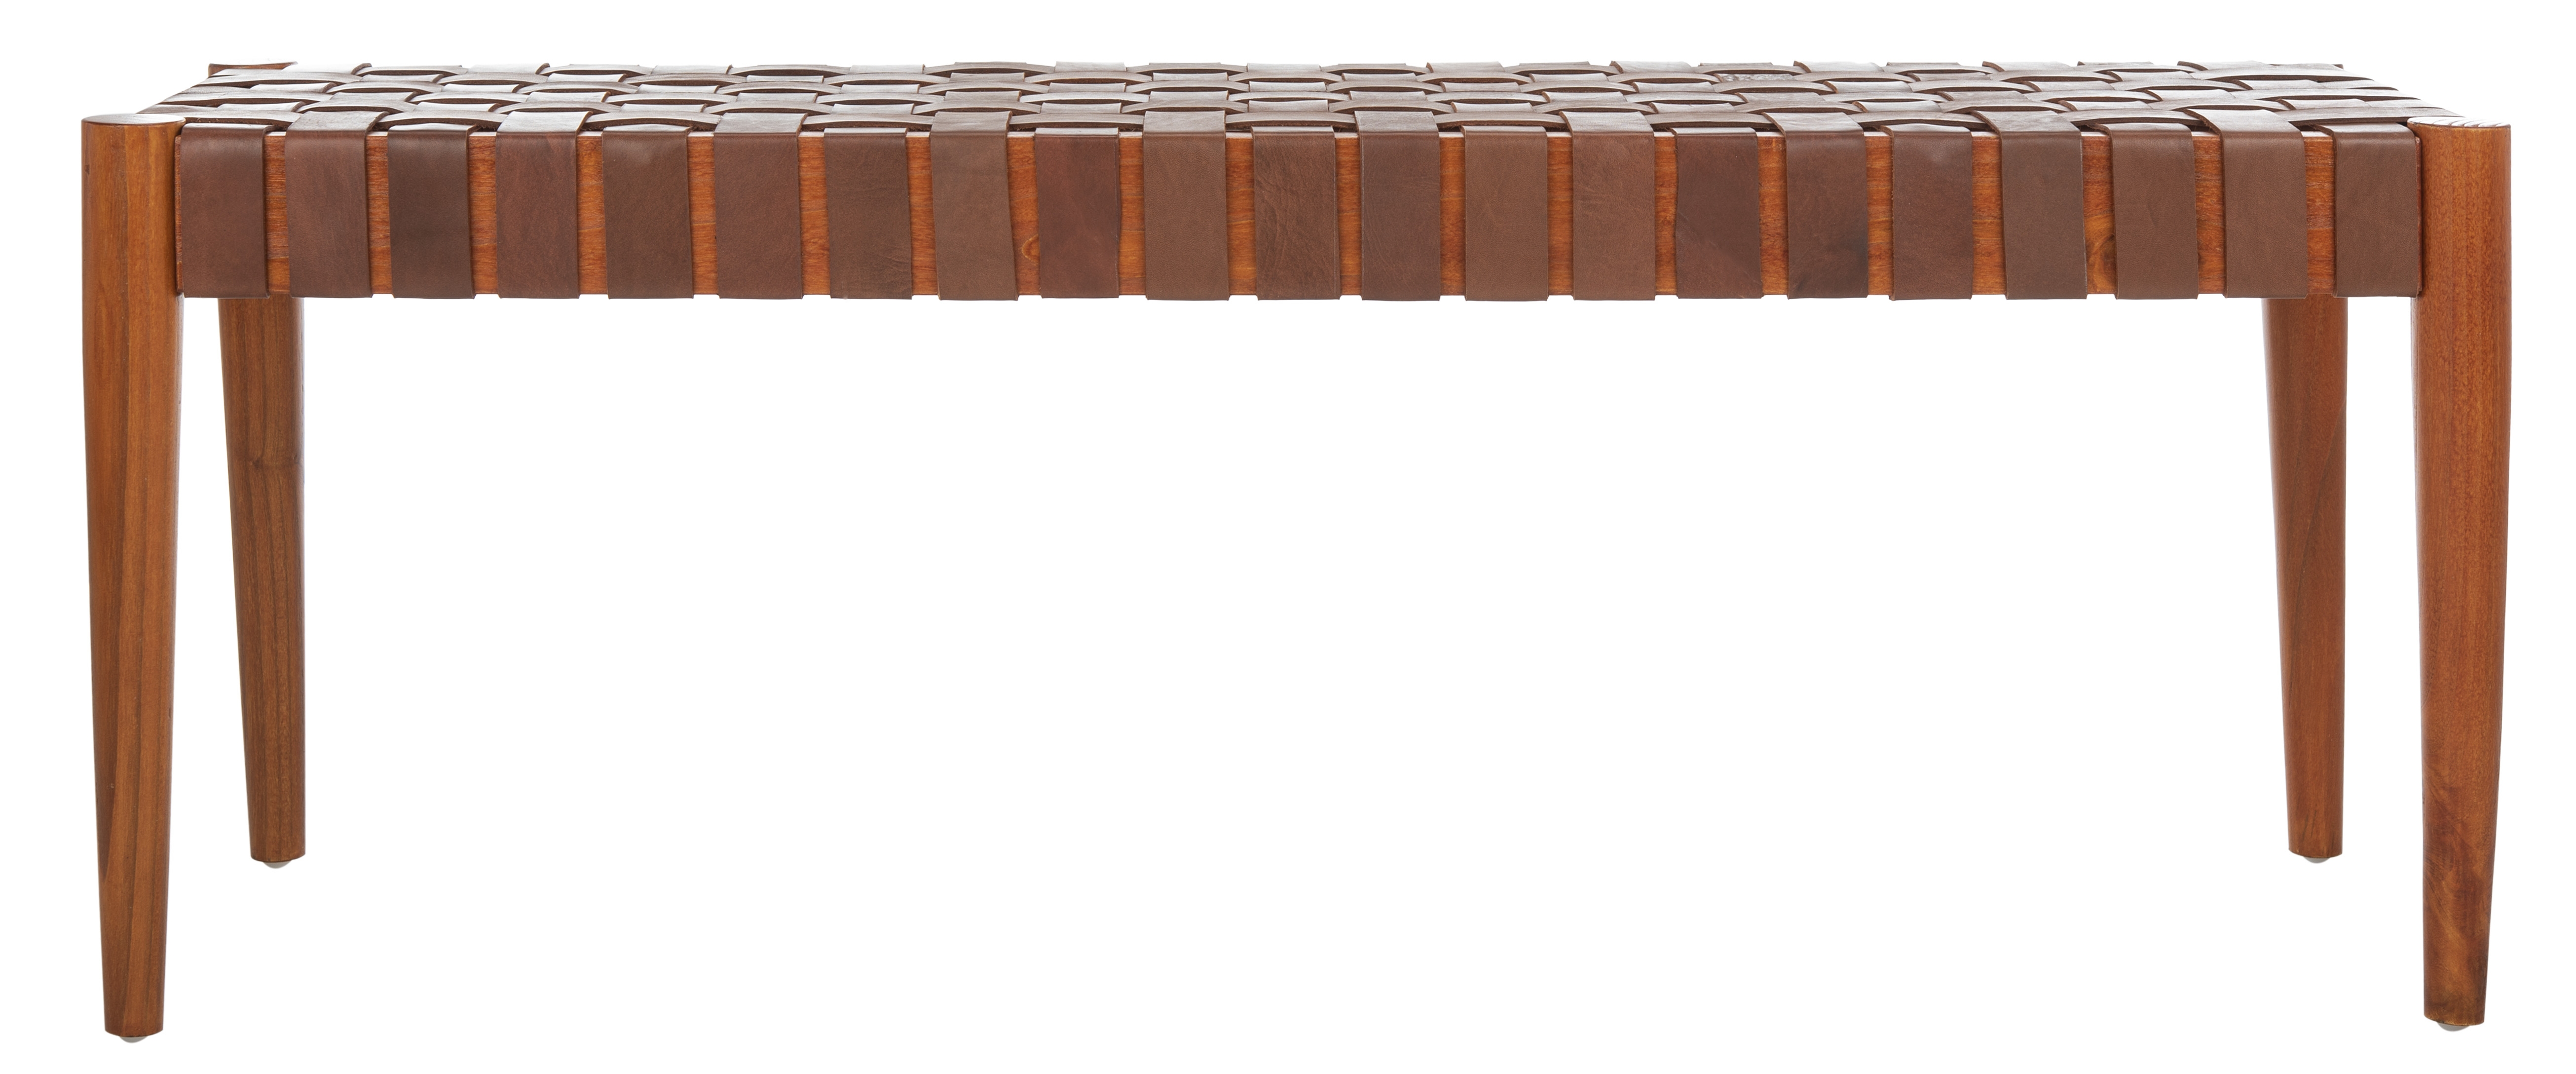 Clyde Bench, Brown - Image 2